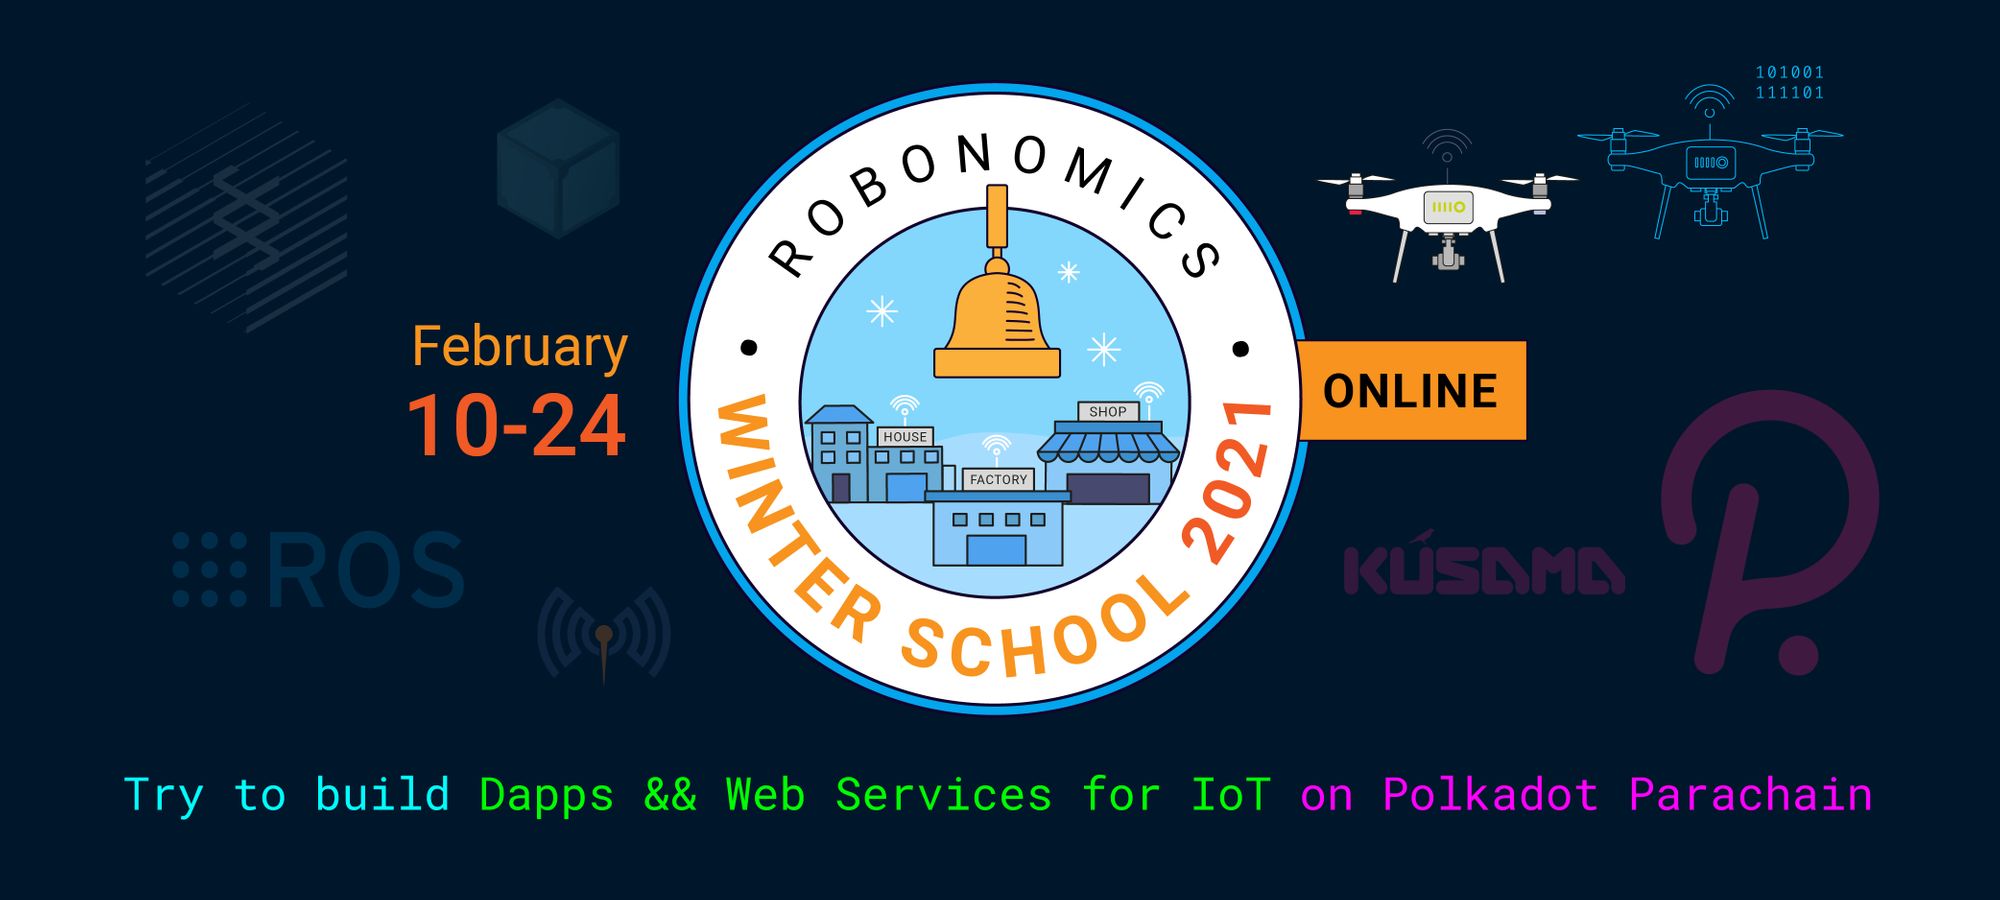 Robonomics Winter School 2021 Master Classes And Lectures Open For Attendees